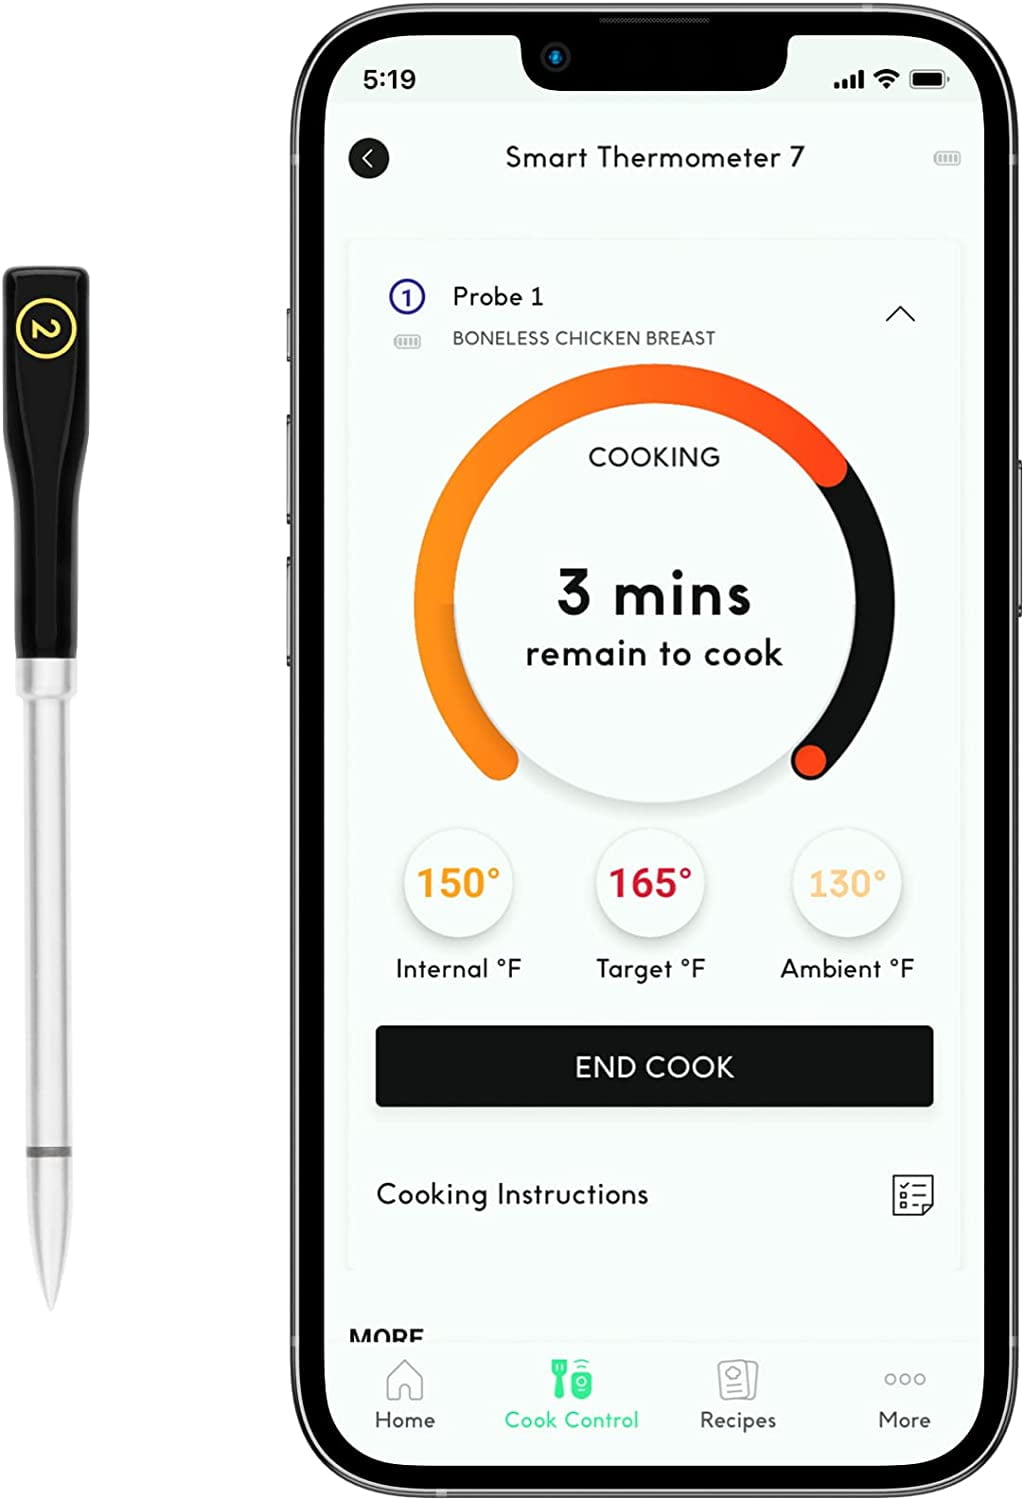  CHEF iQ Smart Wireless Meat Thermometer with 3 Ultra-Thin  Probes, Unlimited Range Bluetooth Meat Thermometer, Digital Food Thermometer  for Remote Monitoring of BBQ Grill, Oven: Home & Kitchen